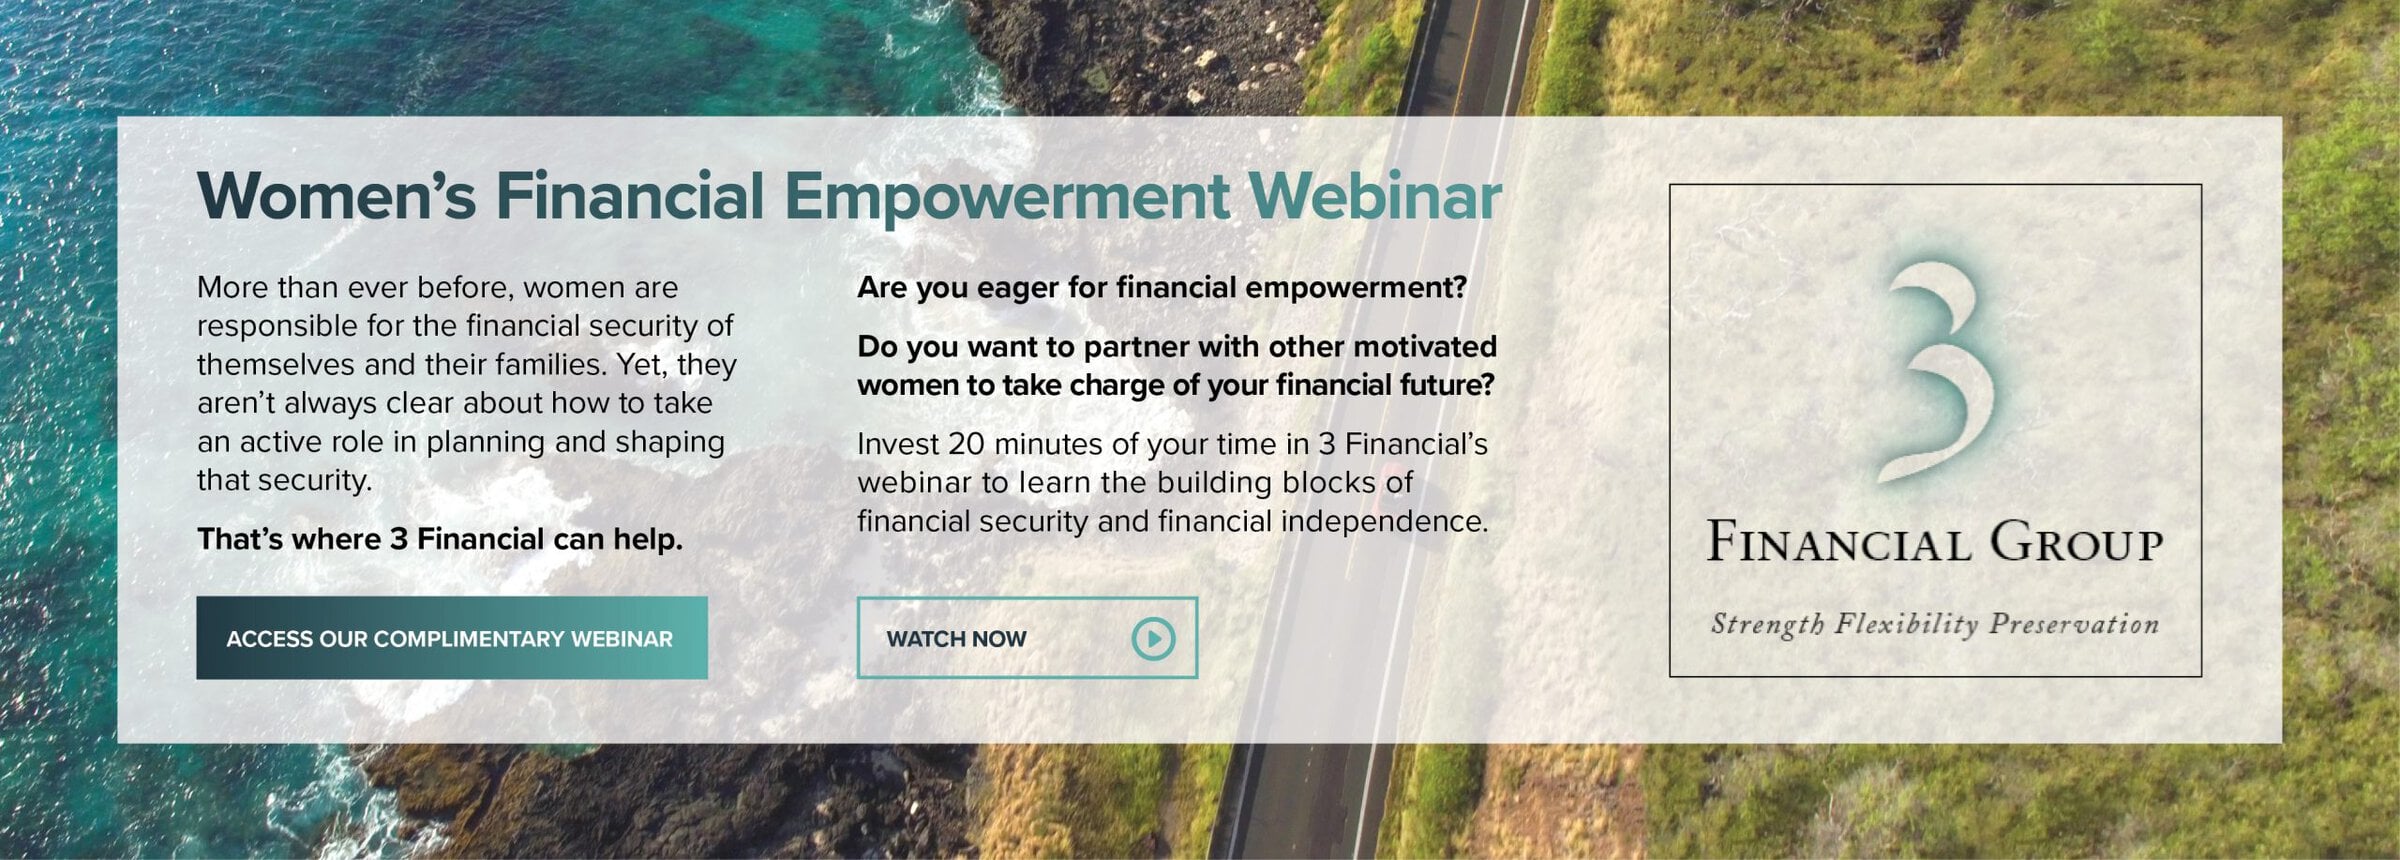 Are you eager for<br> financial empowerment?  